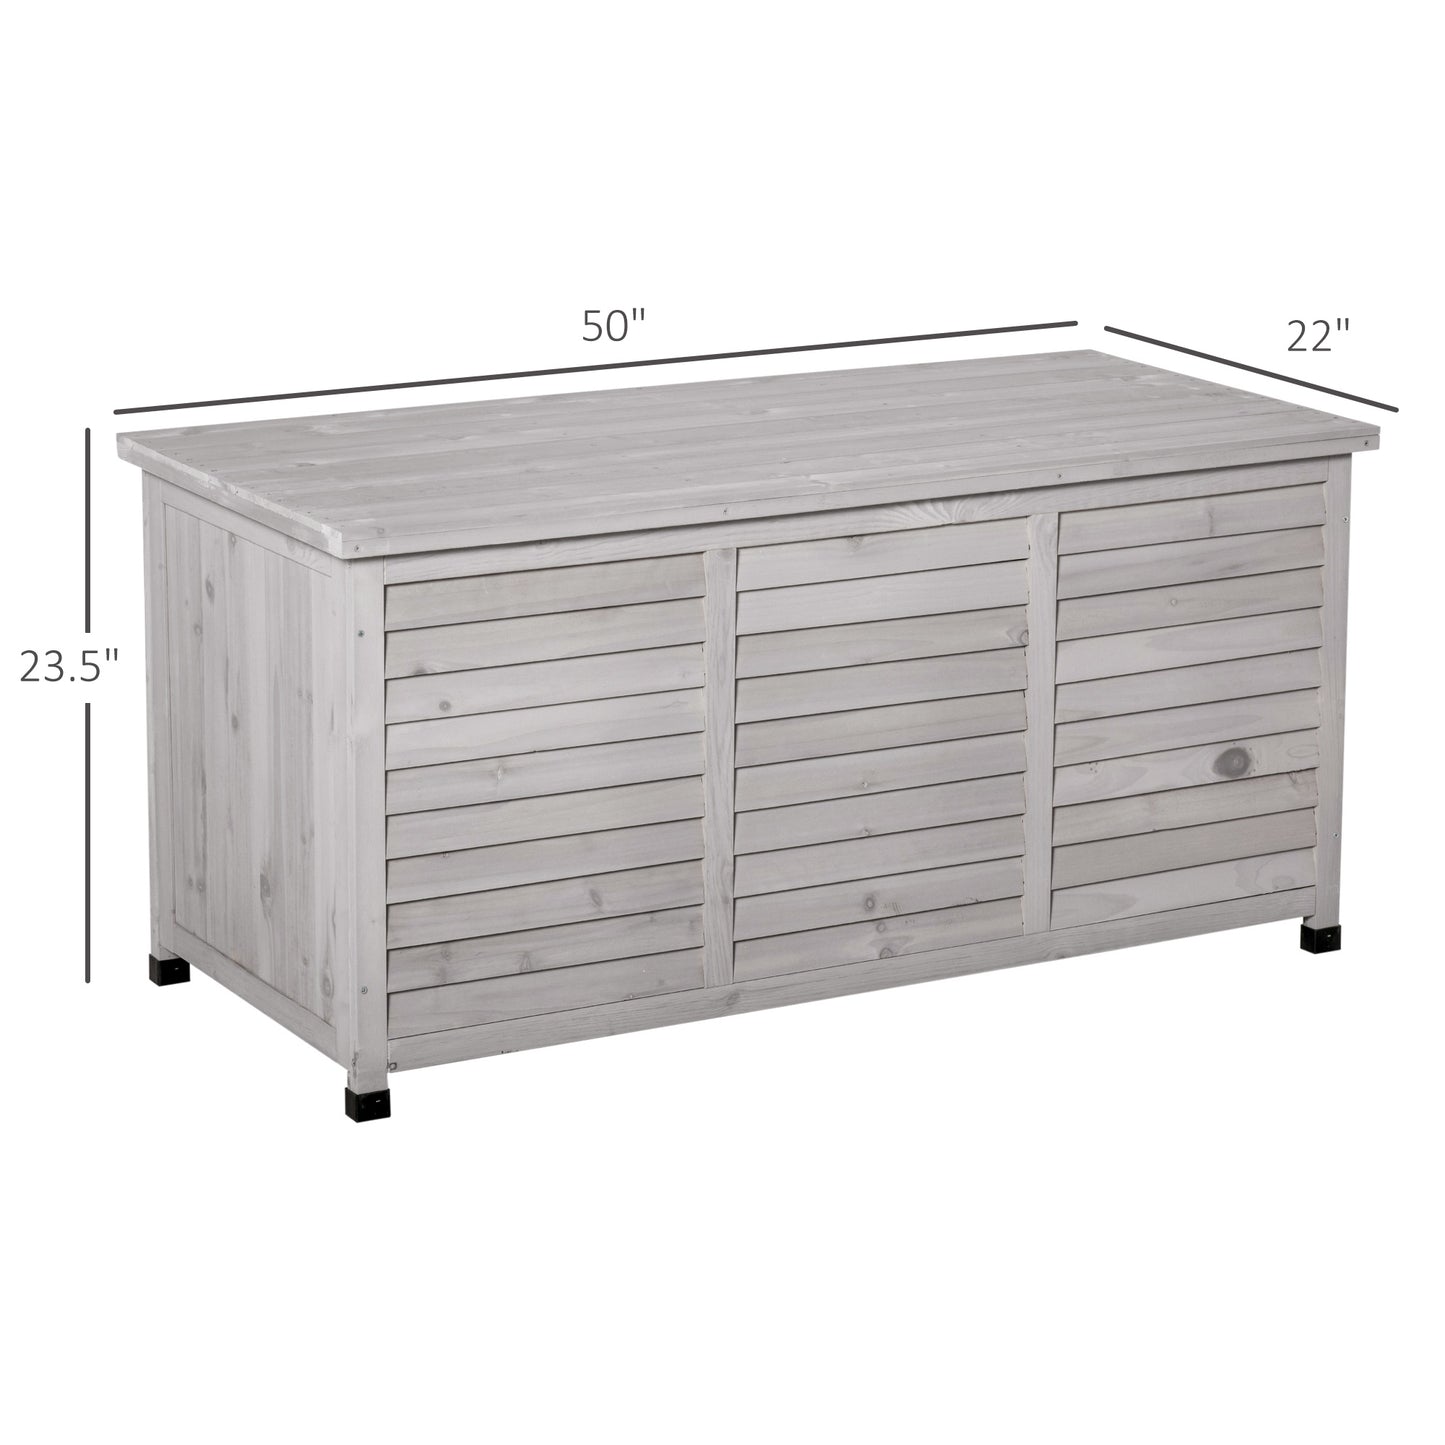 75 Gallon Wooden Storage Box patio Deck Box Bench, Garden Backyard Outdoor Storage Container with Aerating Gap &; Weather-Fighting Finish, Gray - Gallery Canada